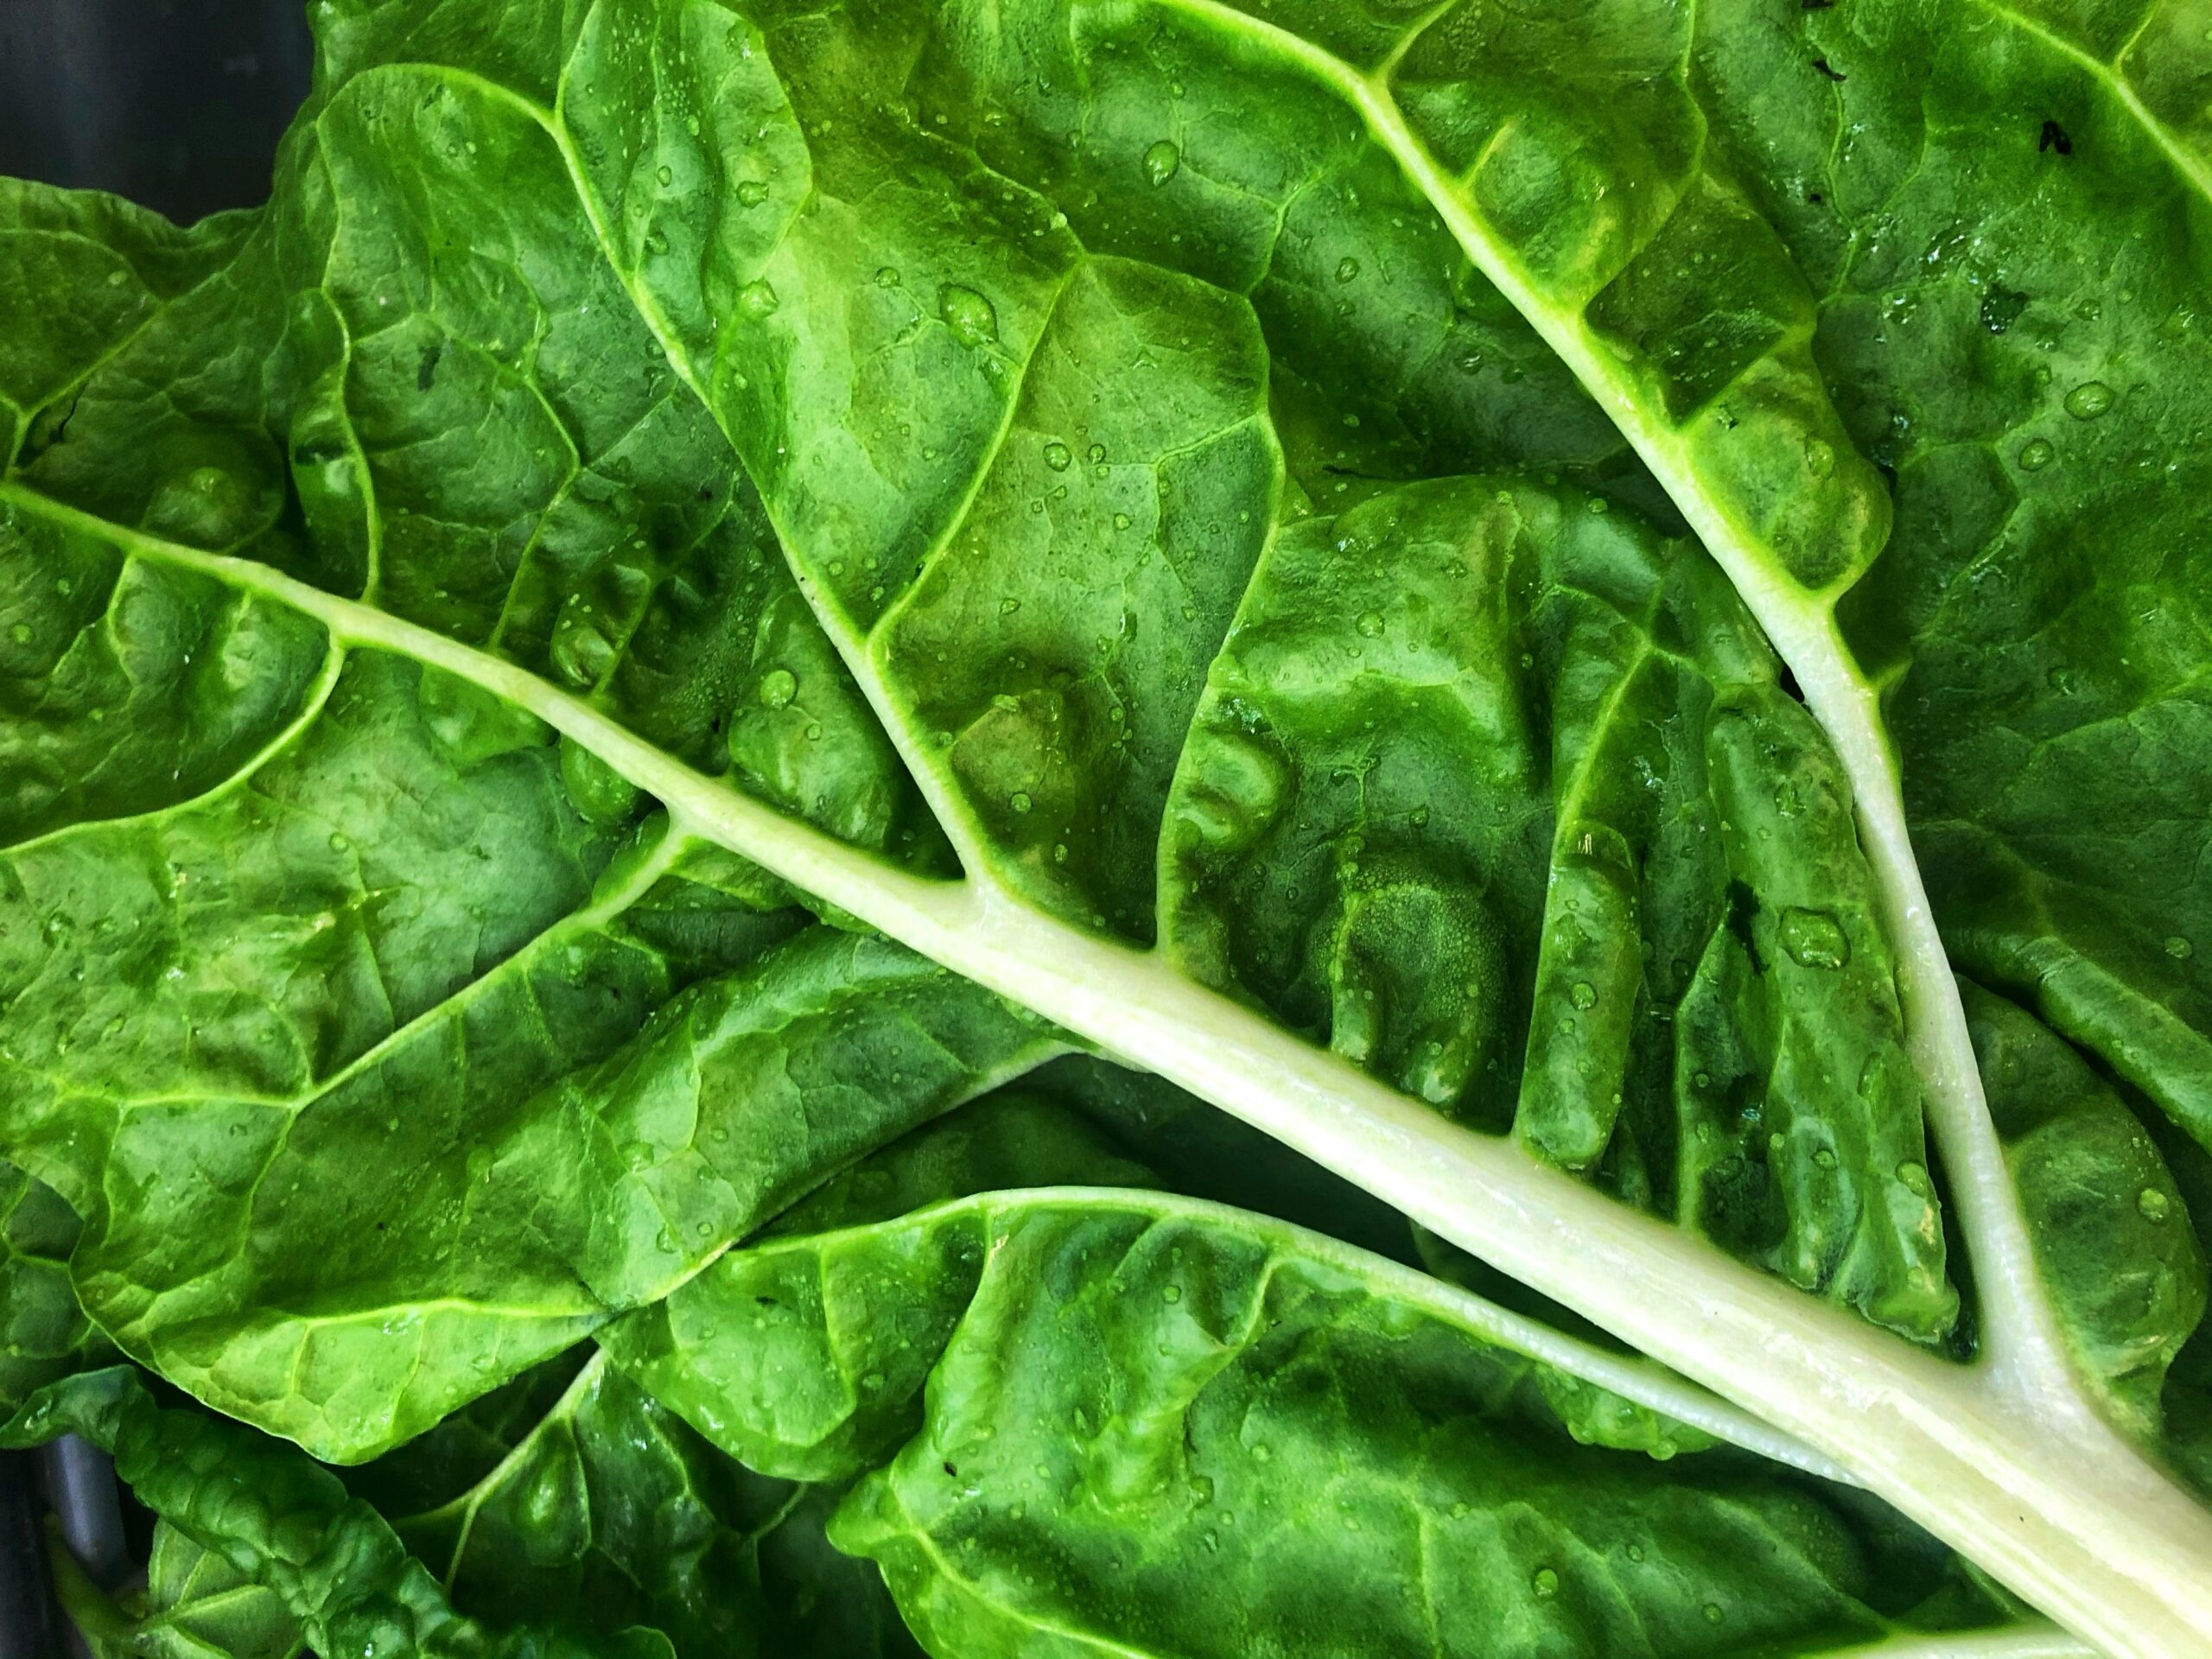 A zoomed in picture of a bright green kale leaf.